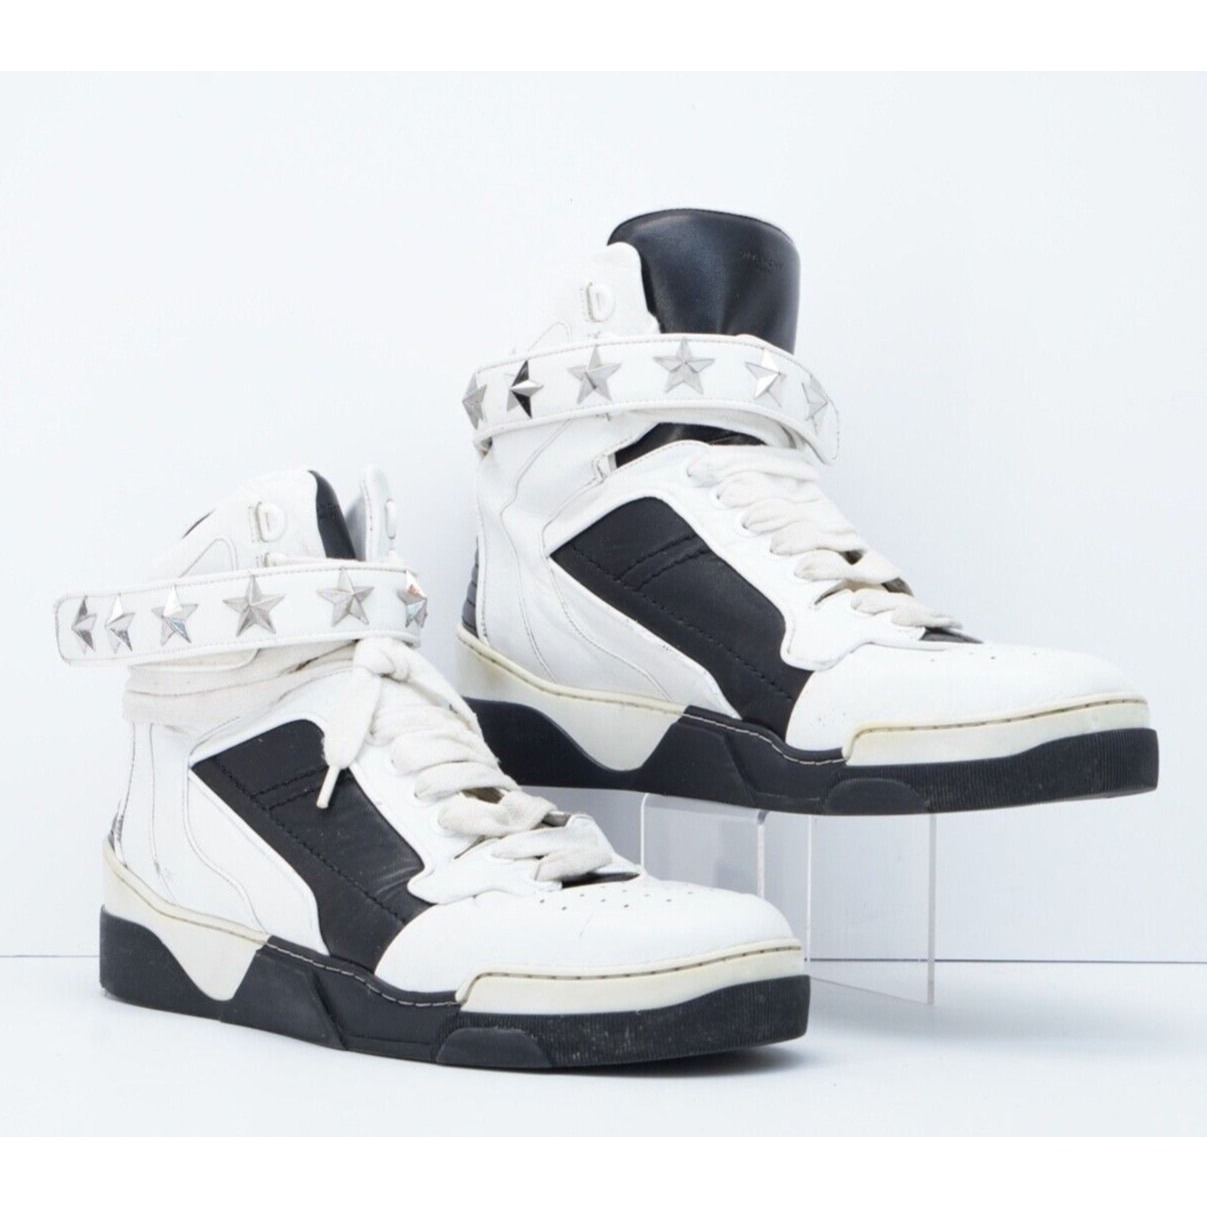 Givenchy Tyson Star Sneakers Shoes White Leather High Top 44 - 1